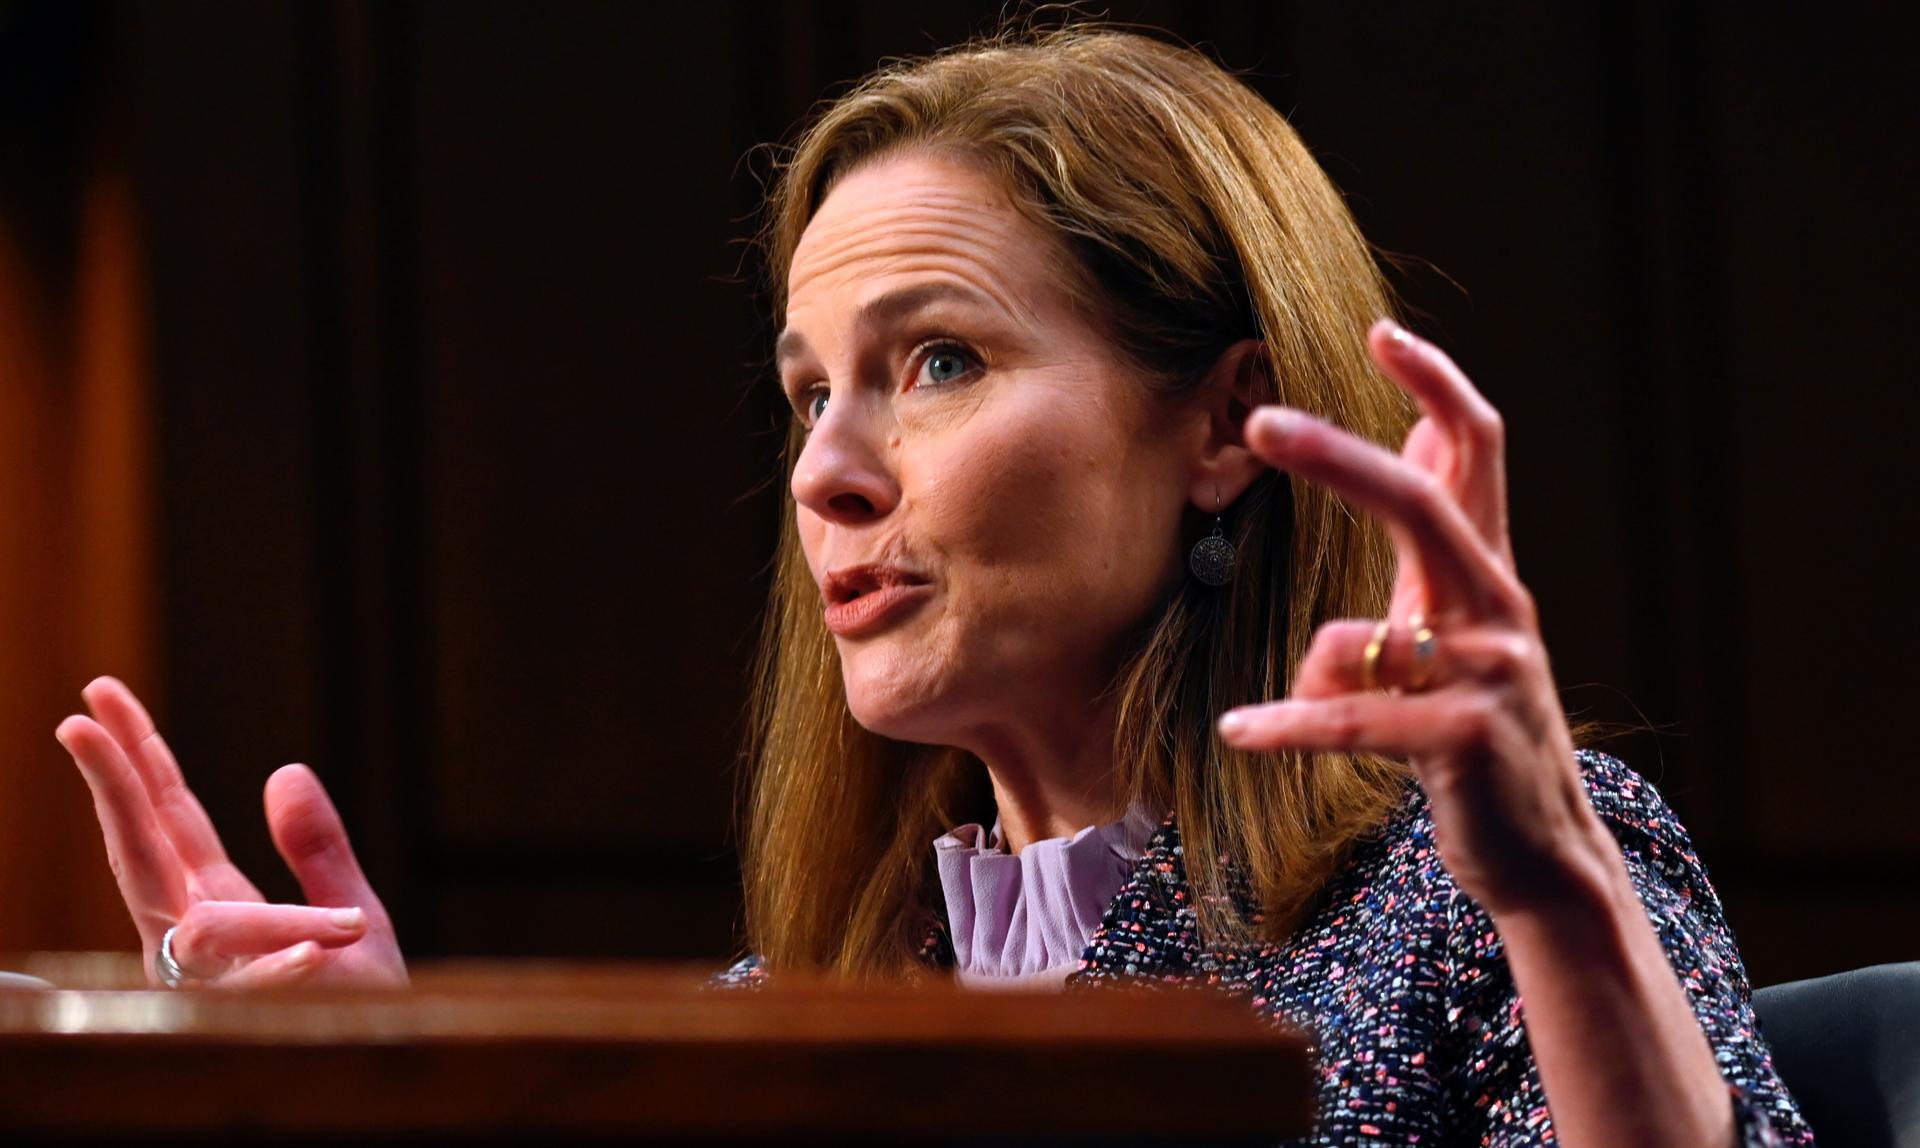 Judge Amy Coney Barrett speaks and gestures into a mic during the third day of her Senate confirmation hearing.  